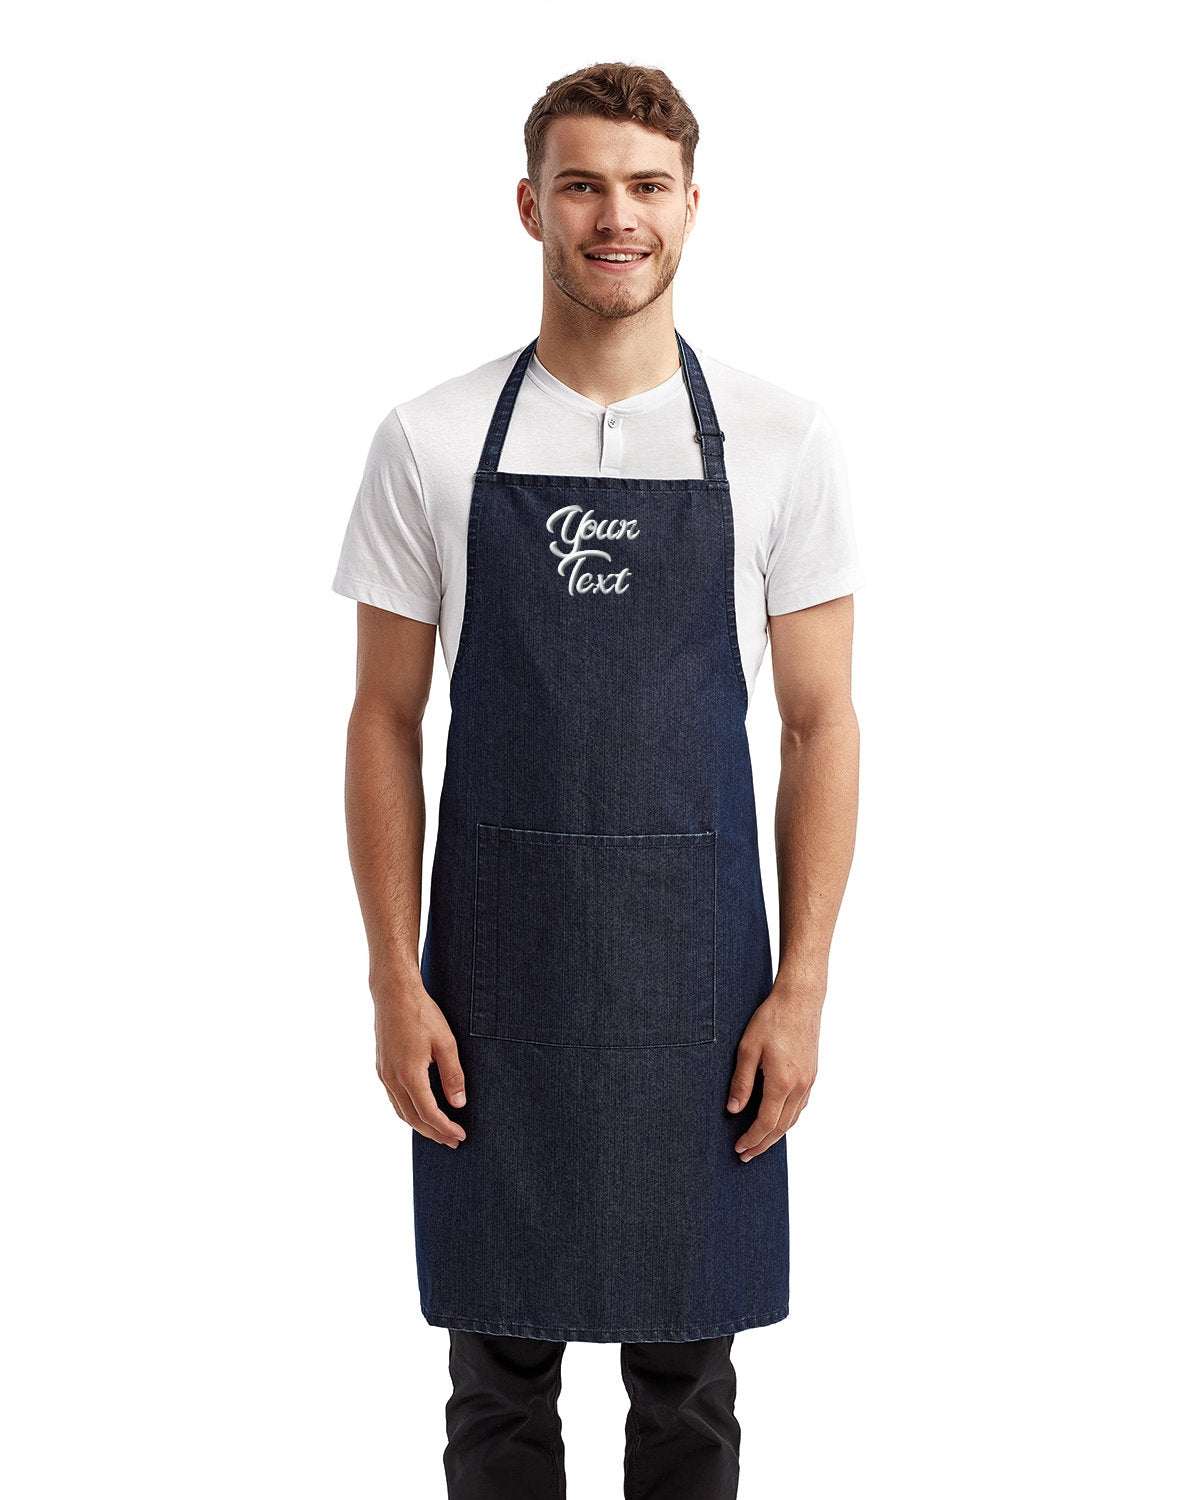 Restaurant Aprons with Your Company Name Embroidered - 3 Pack indigo denim